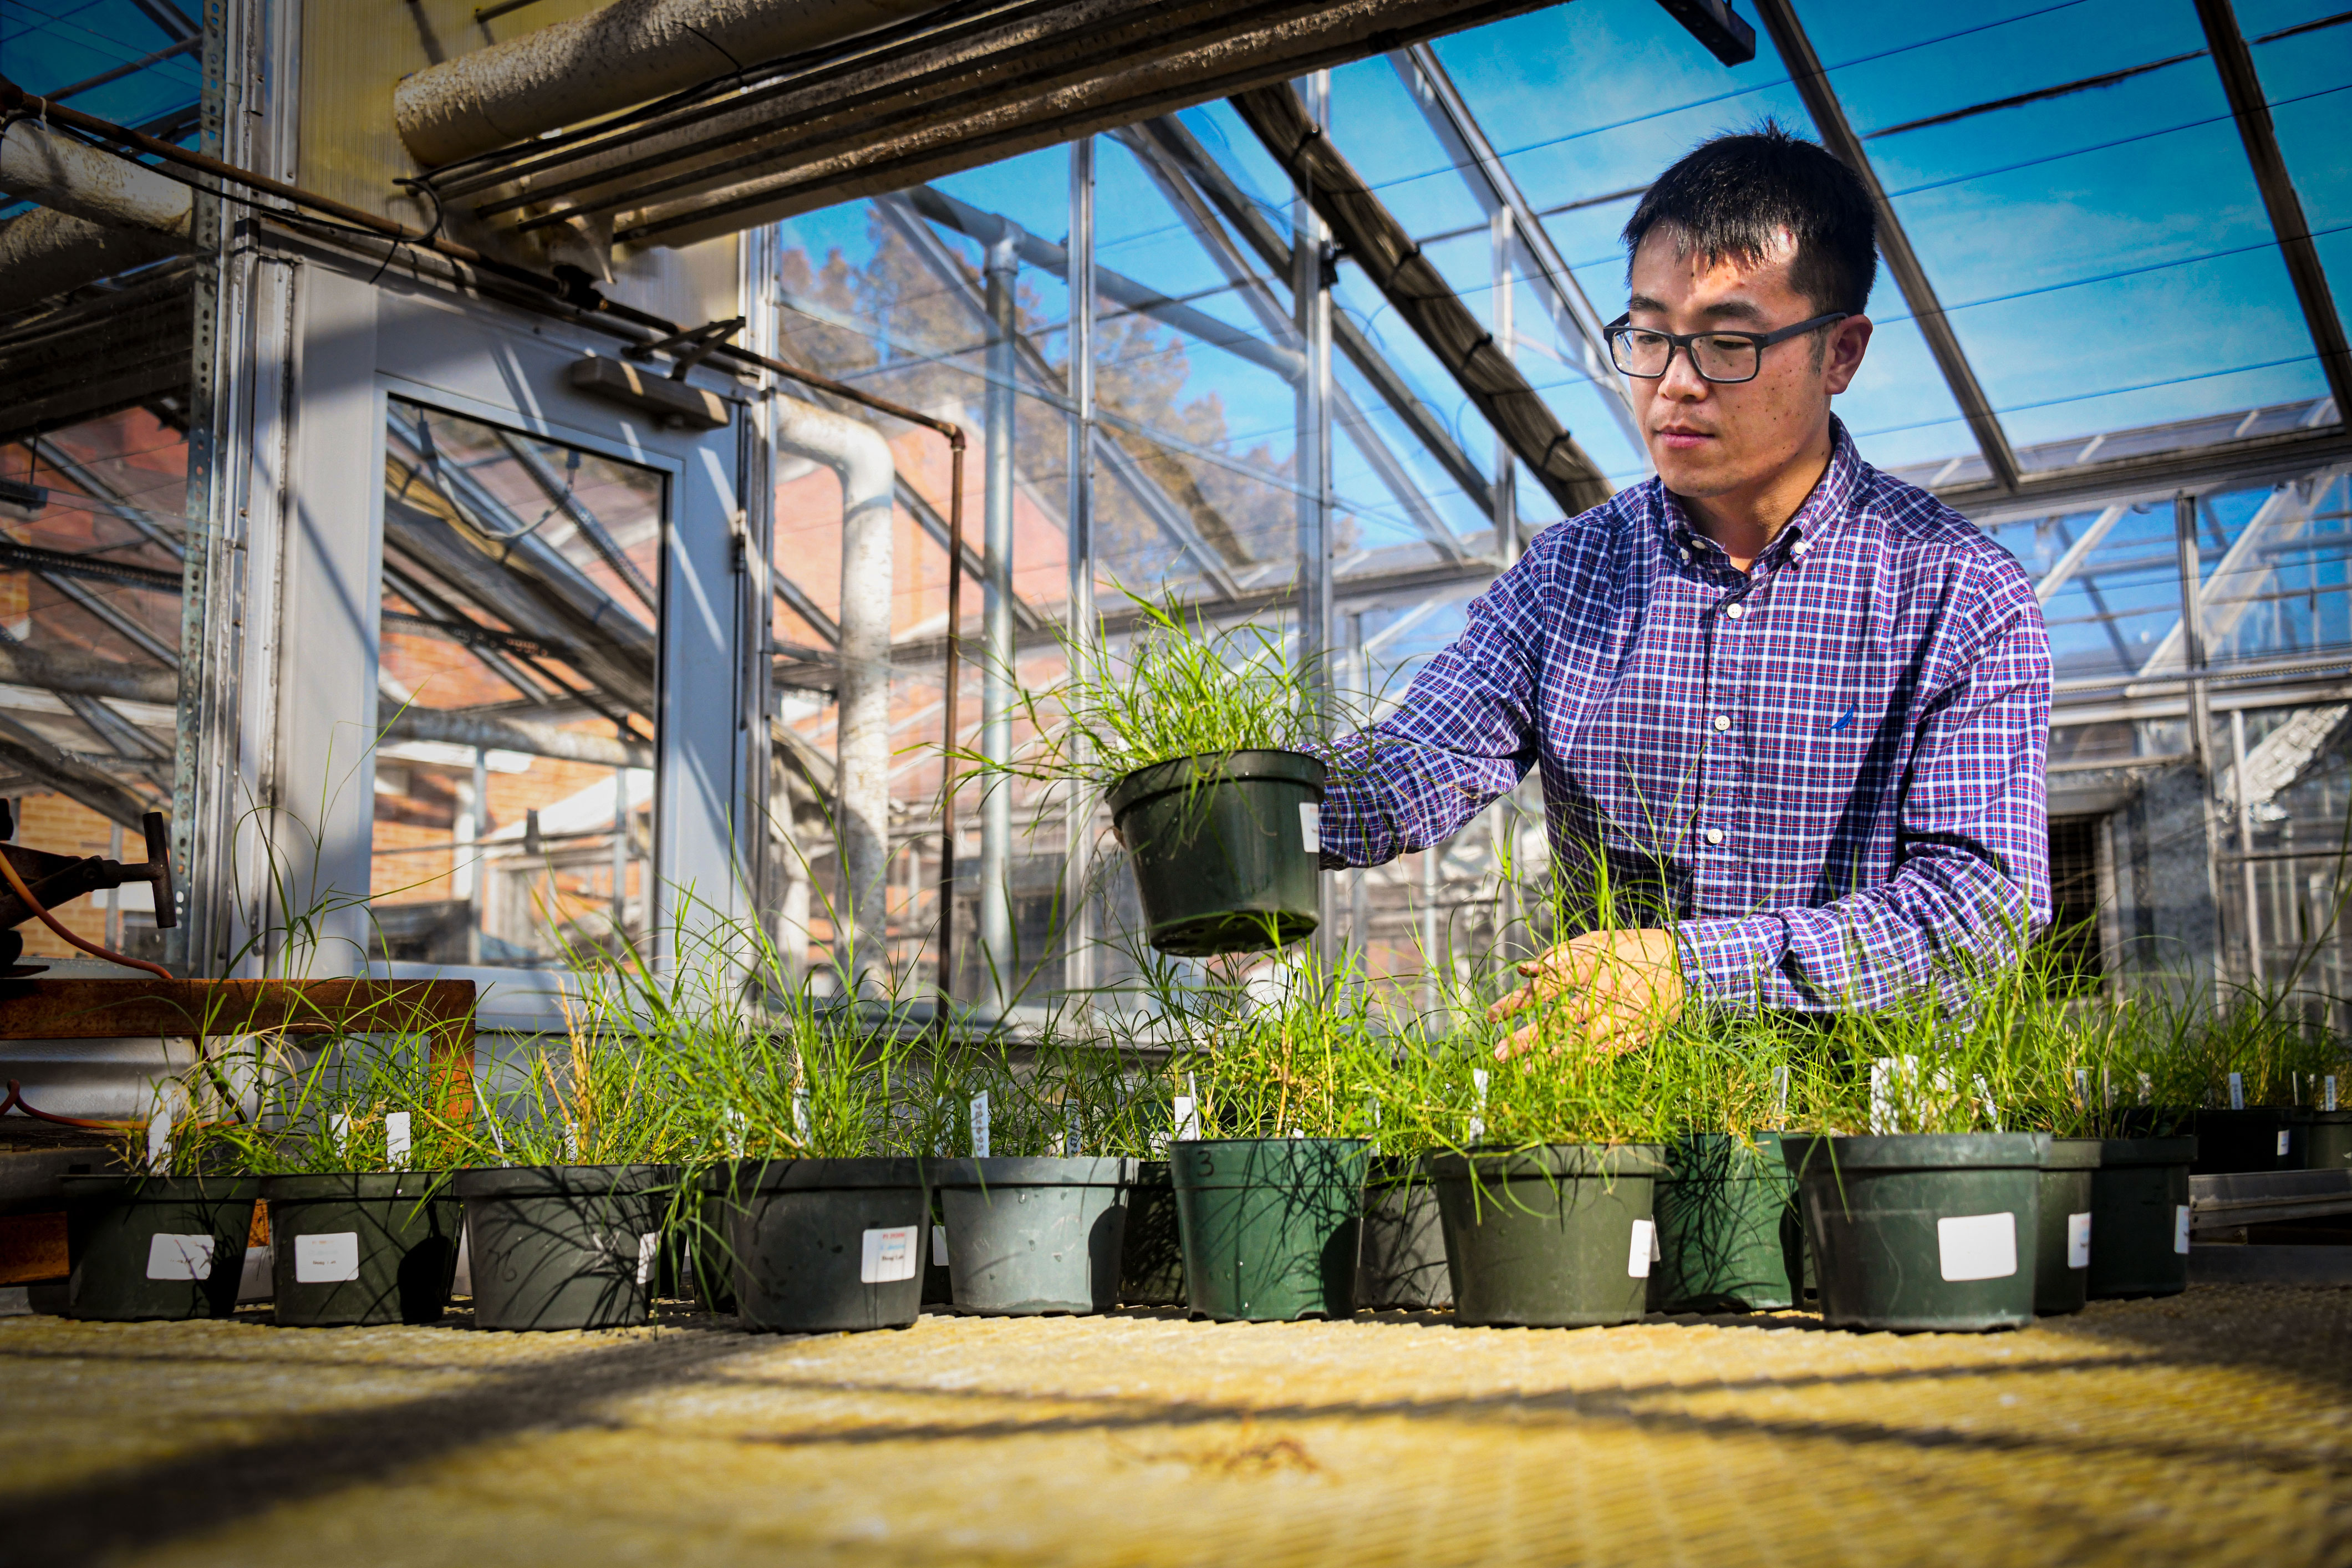 Mississippi State Assistant Professor Hongxu Dong, a scientist in the Mississippi Agricultural and Forestry Experiment Station who specializes in turfgrass breeding and genetics, evaluates grasses in a university greenhouse.